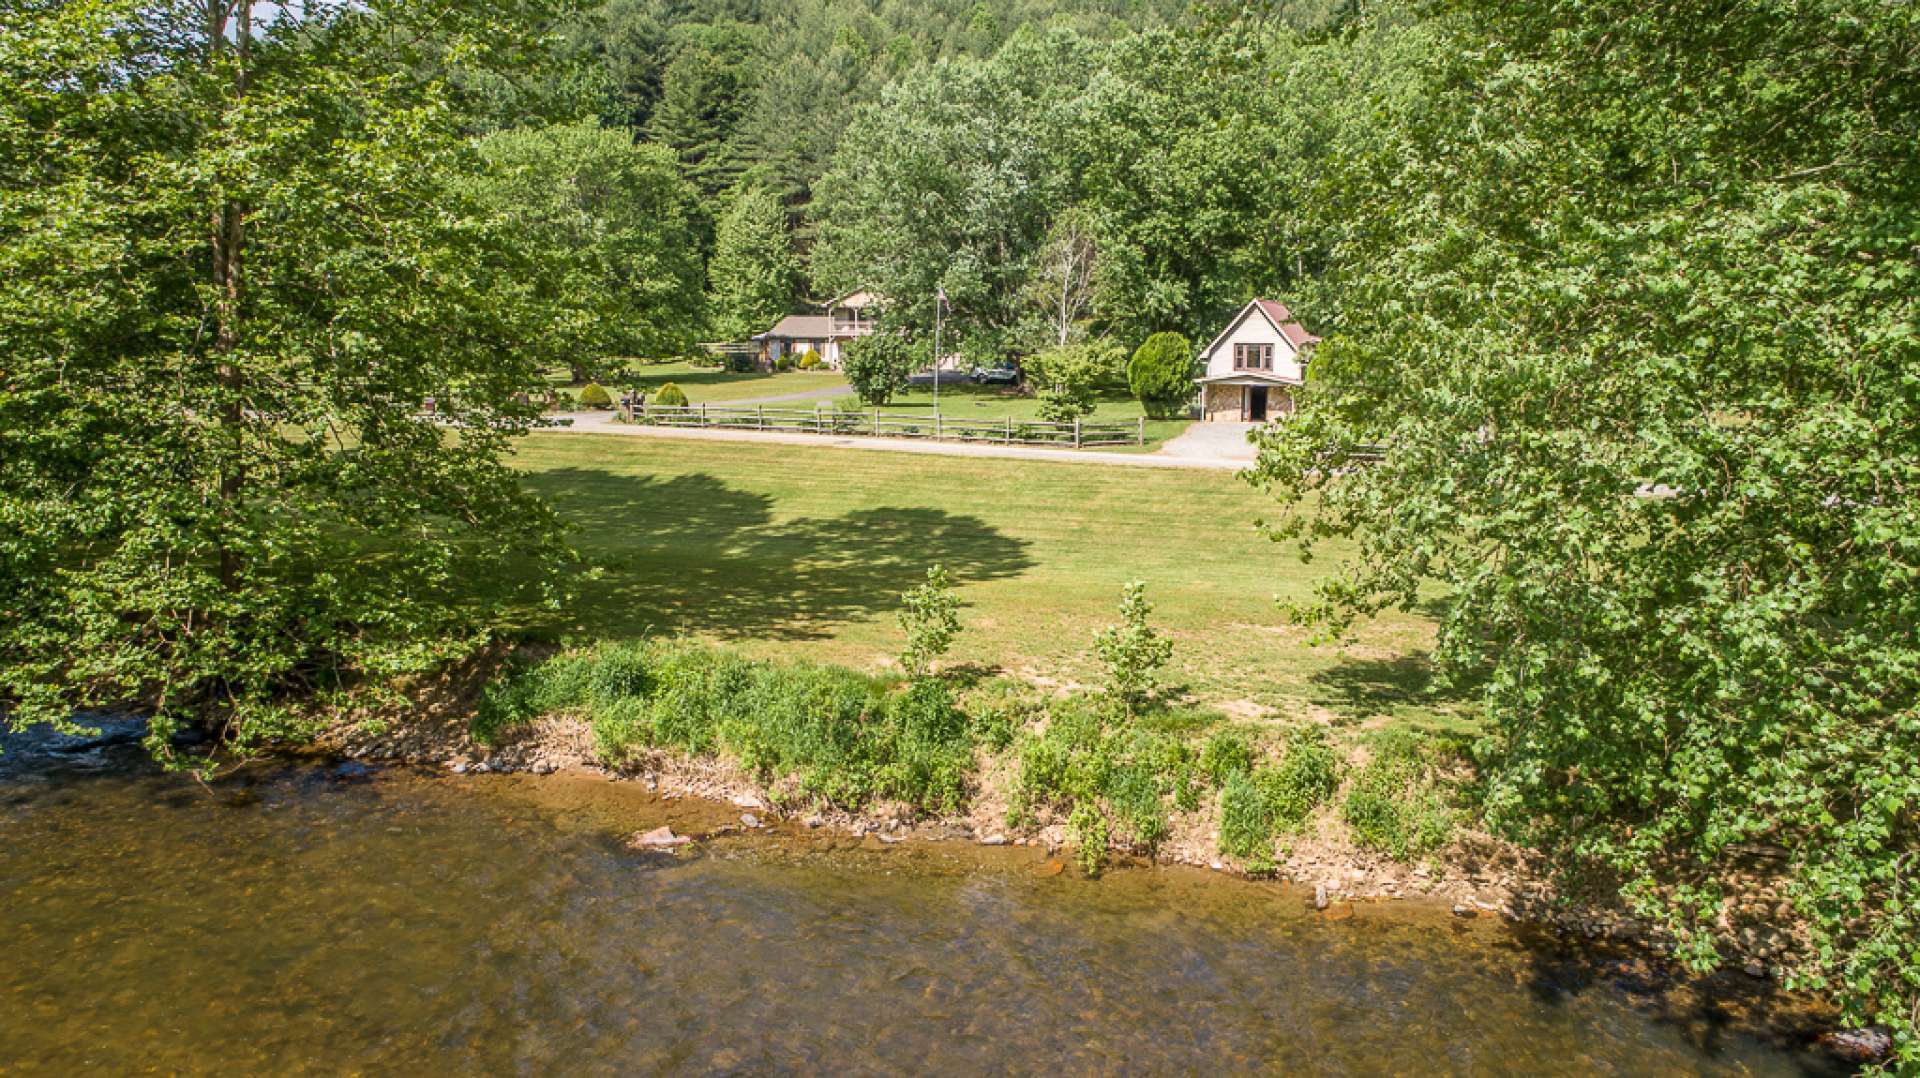 WELCOME HOME to your riverfront estate or retreat in Ashe County, NC. Just too many attributes to mention. Come tour this favored mountain riverfront estate with potential for a summer retreat, primary riverfront estate, equestrian estate, farm or Mountain vineyard. Call today for your appointment to view this gorgeous riverfront property offered at $750,000. P105